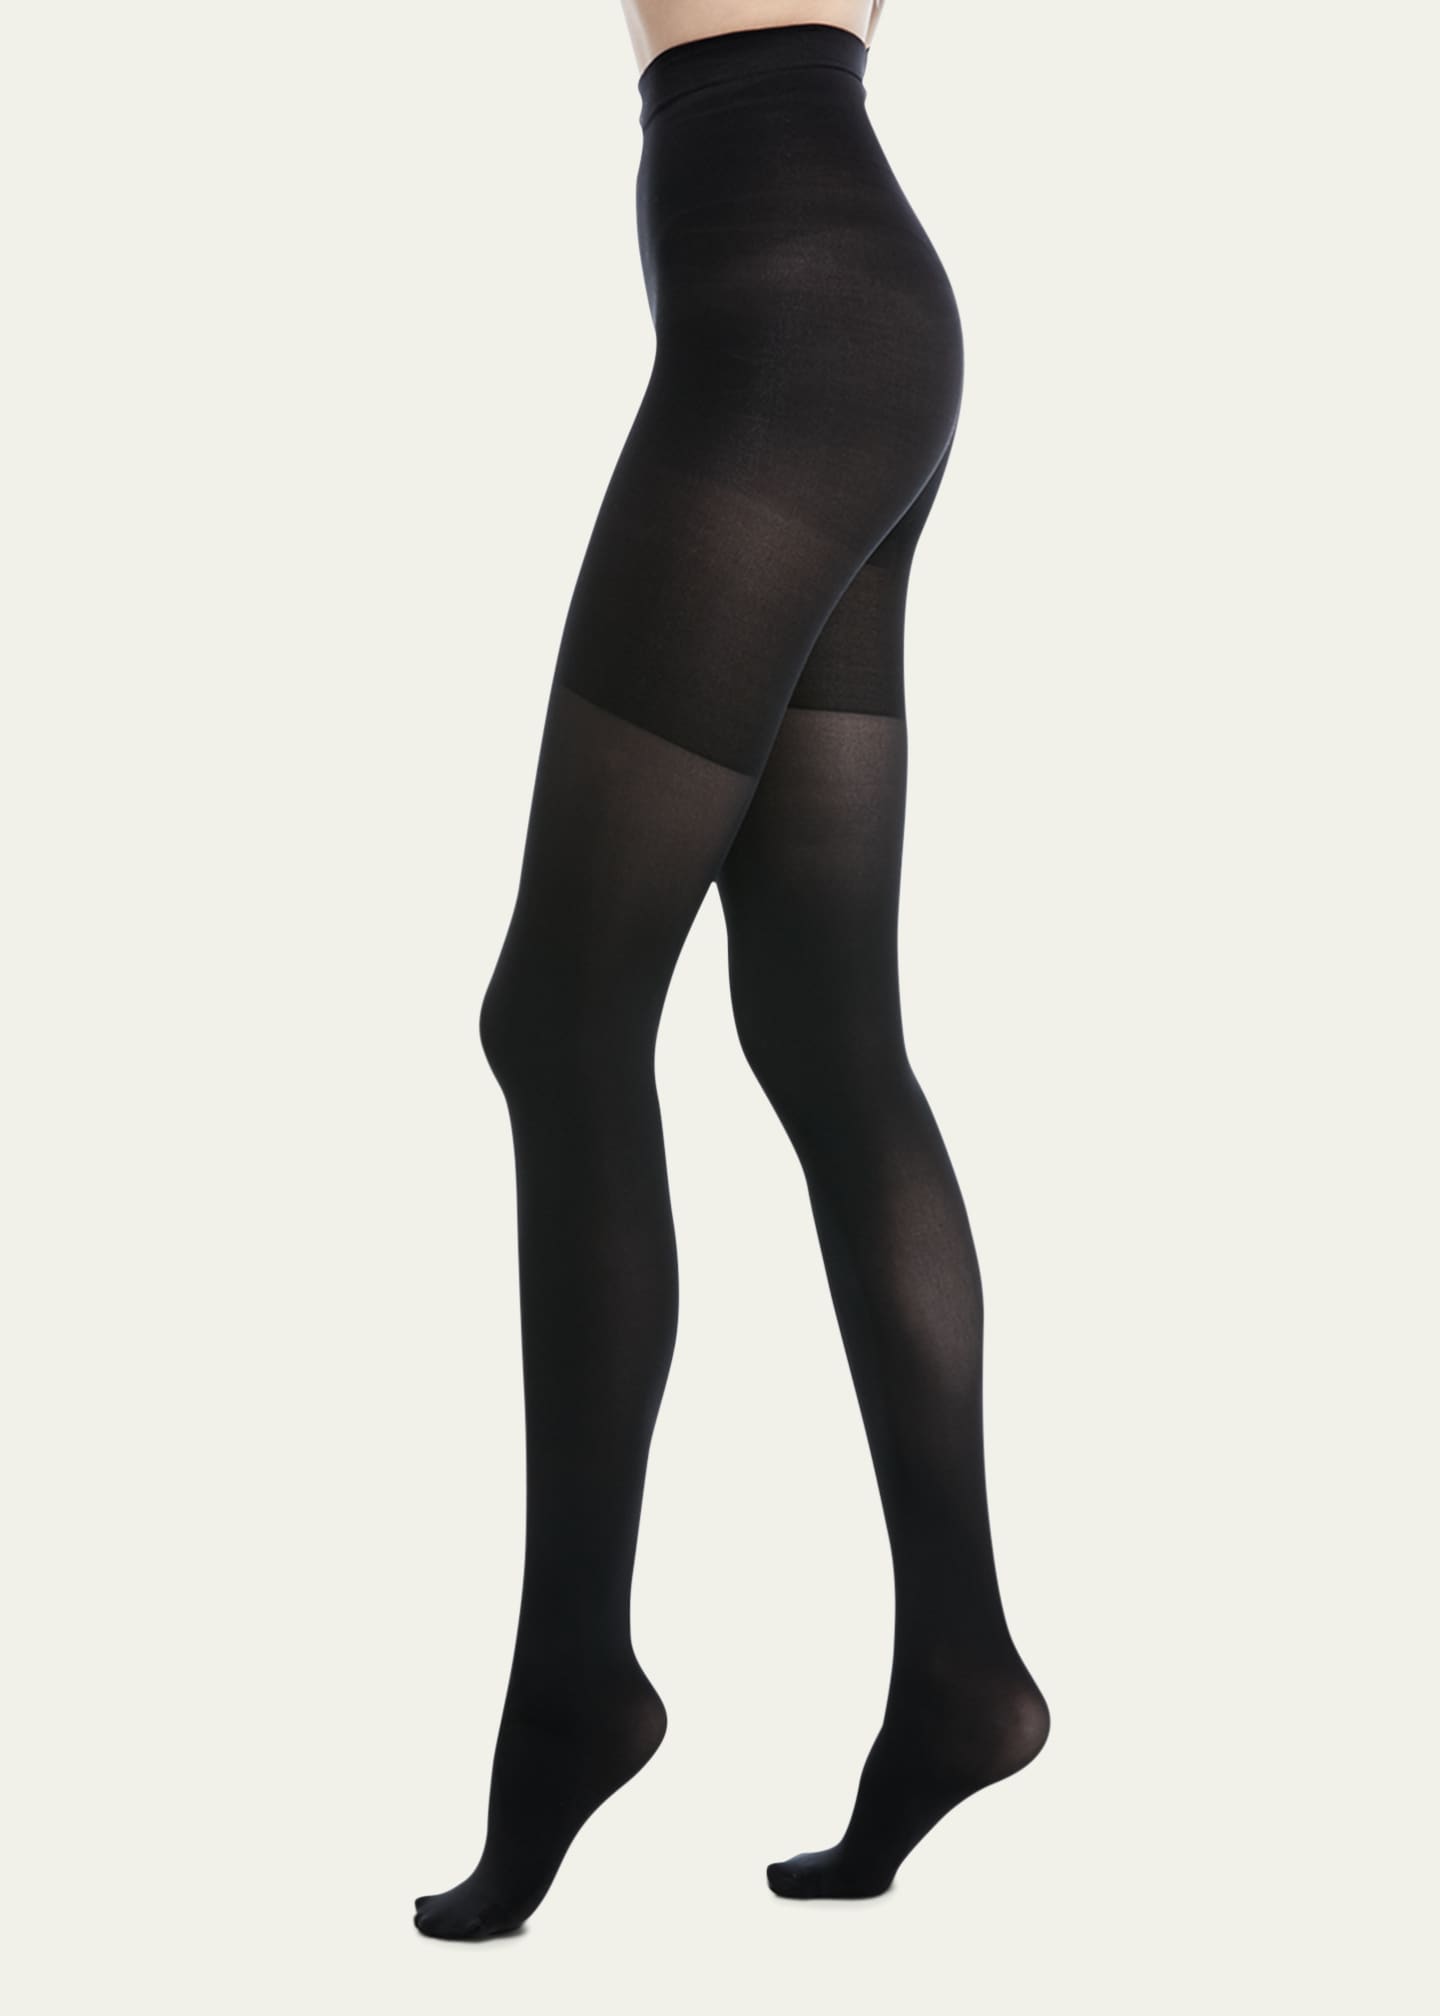 Spanx Luxe Sheer Shaping Tights Image 2 of 4